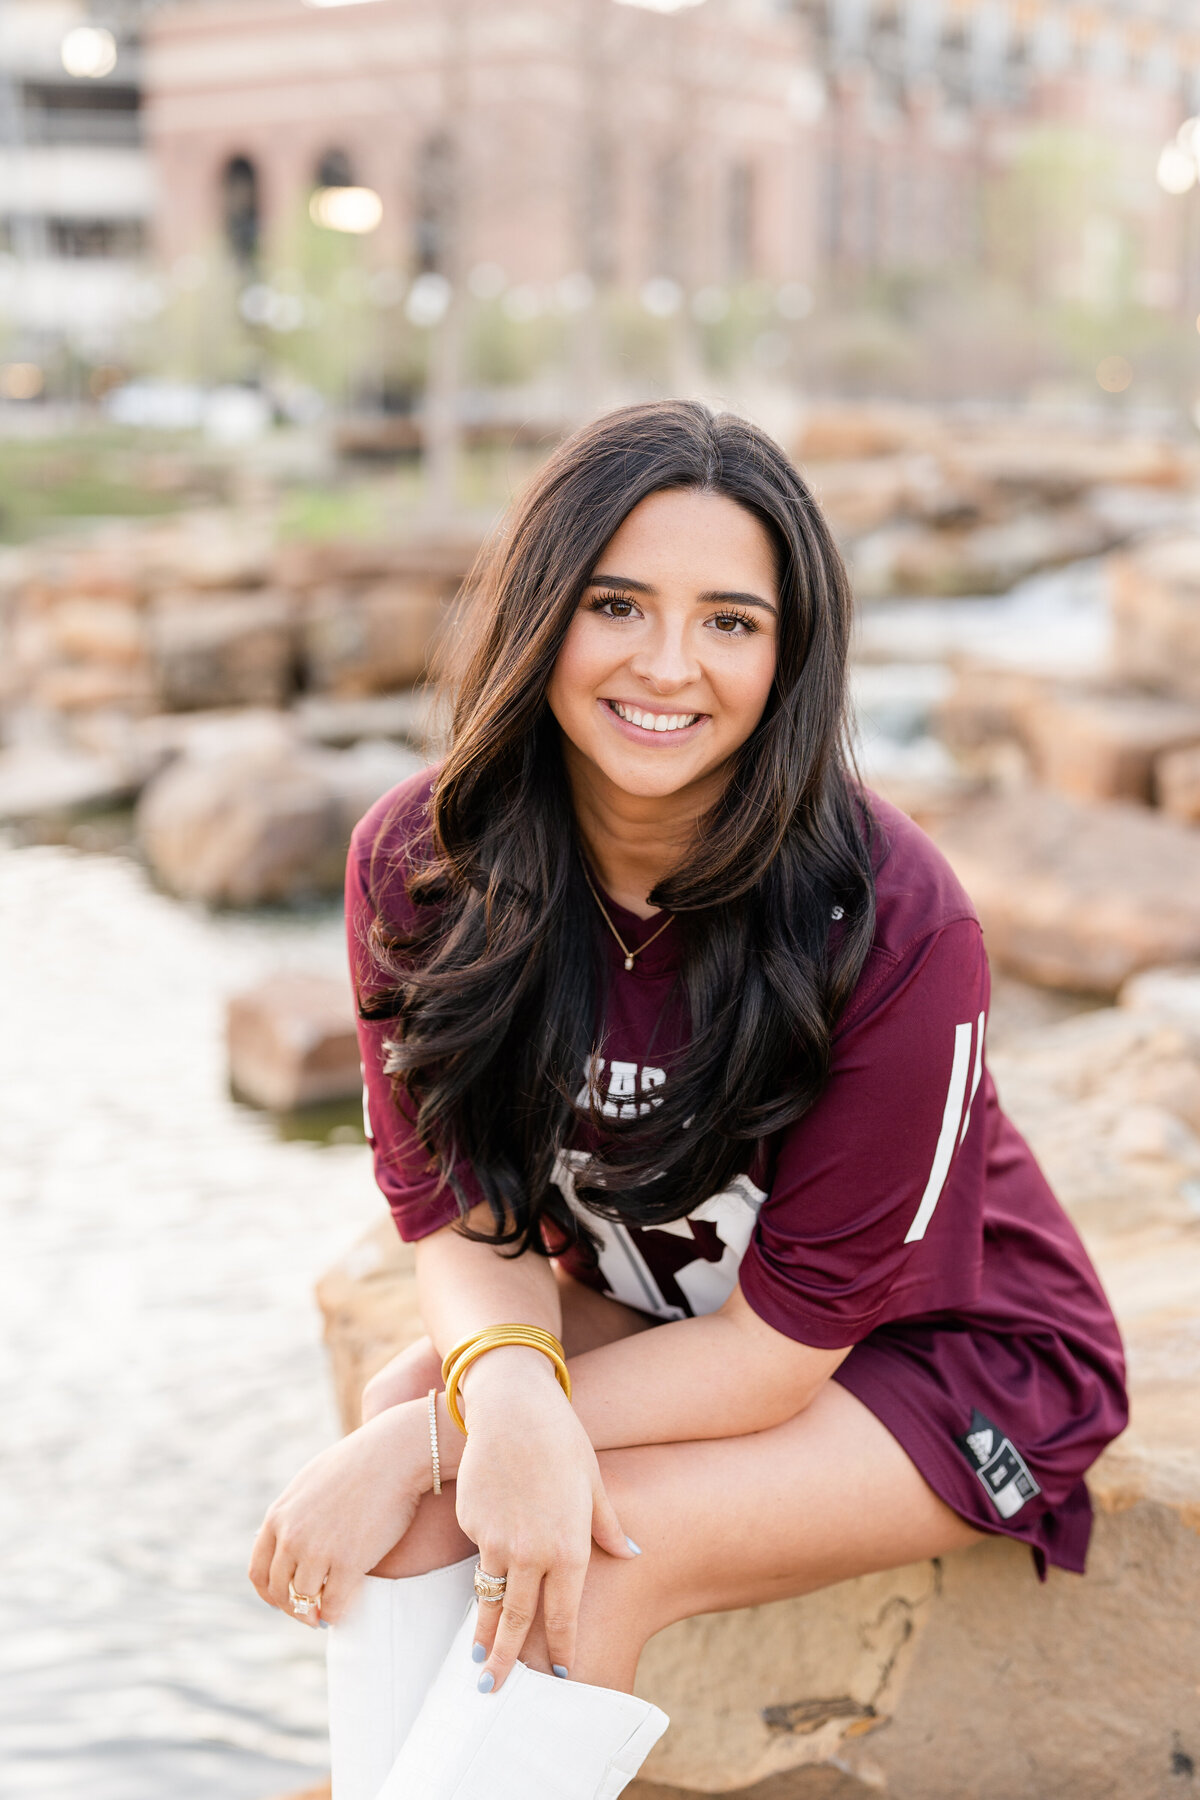 Texas A&M senior girl sitting on rocks and leaning on leg and smiling while wearing Aggie jersey and white boots in Aggie Park